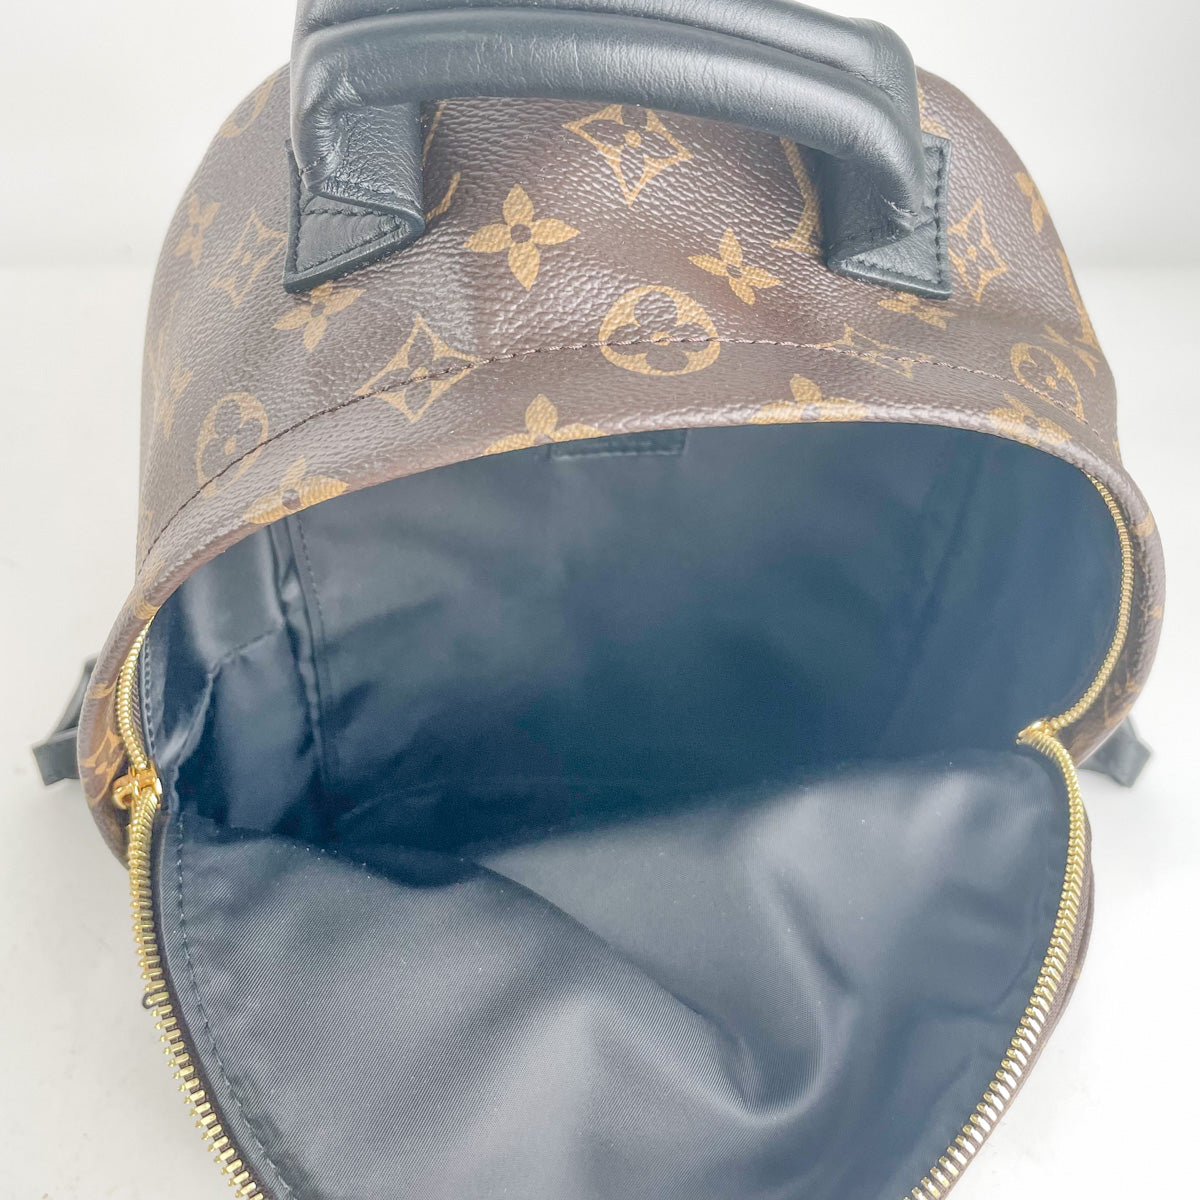 Palm springs cloth backpack Louis Vuitton Black in Cloth - 25251207